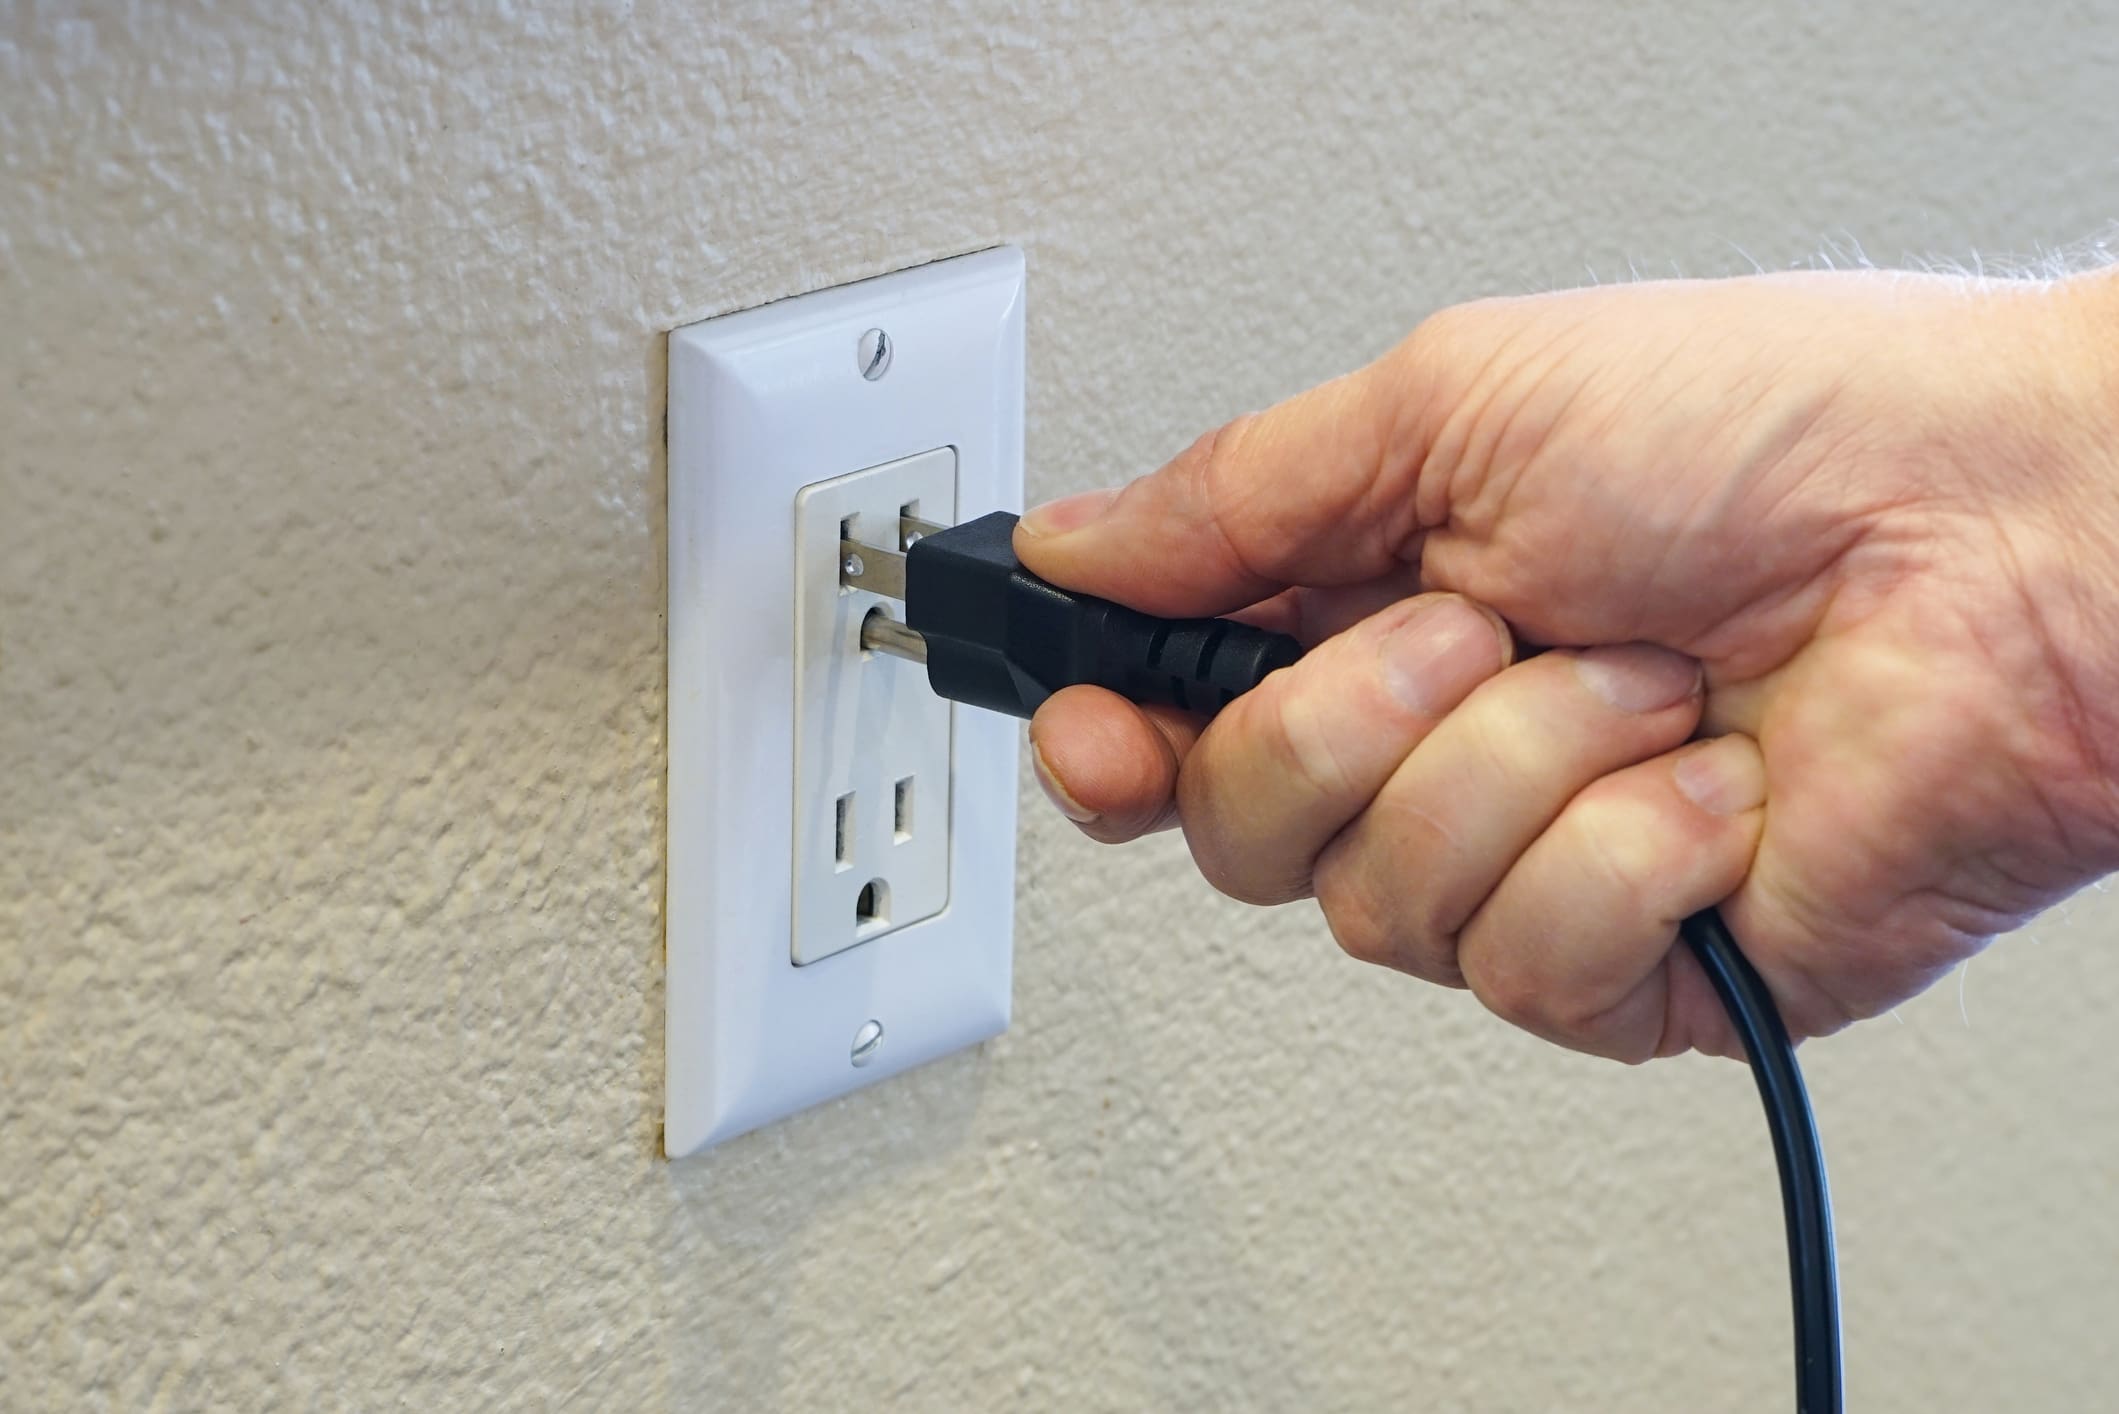 Hand Plugging Cord Into Outlet